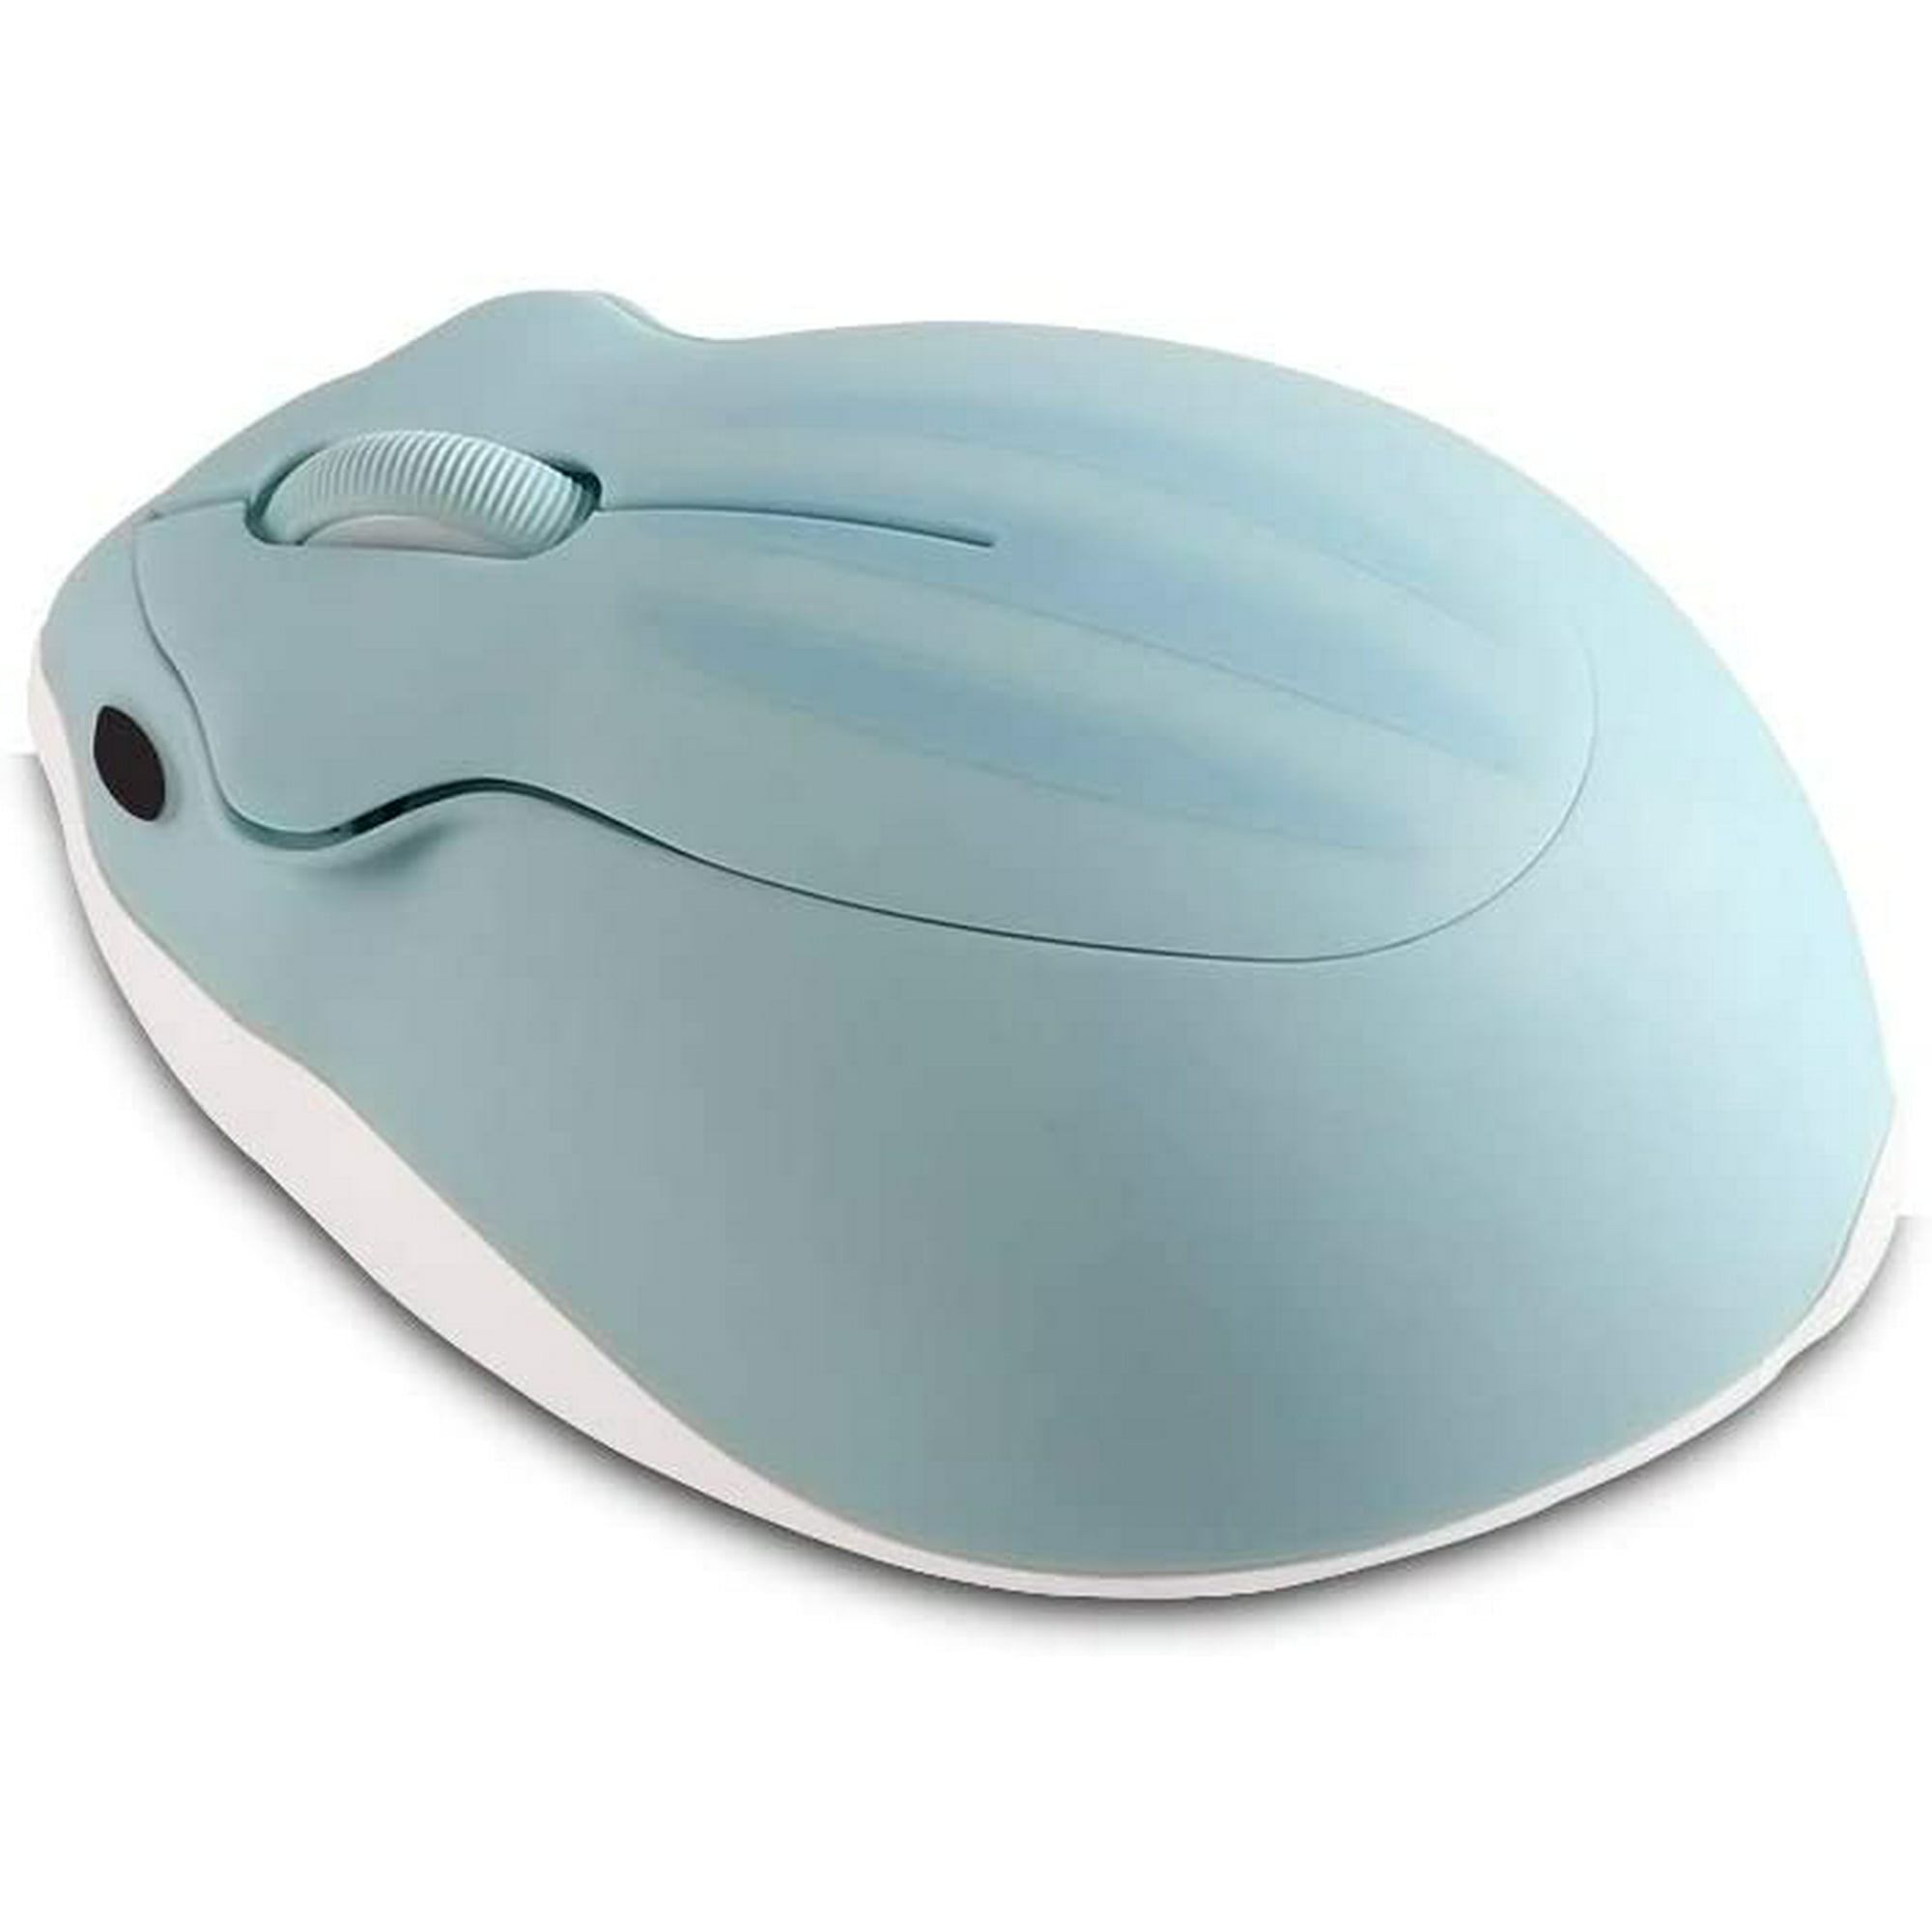 Wireless Mouse Cute Hamster Shaped Computer Mouse 1200DPI Less 